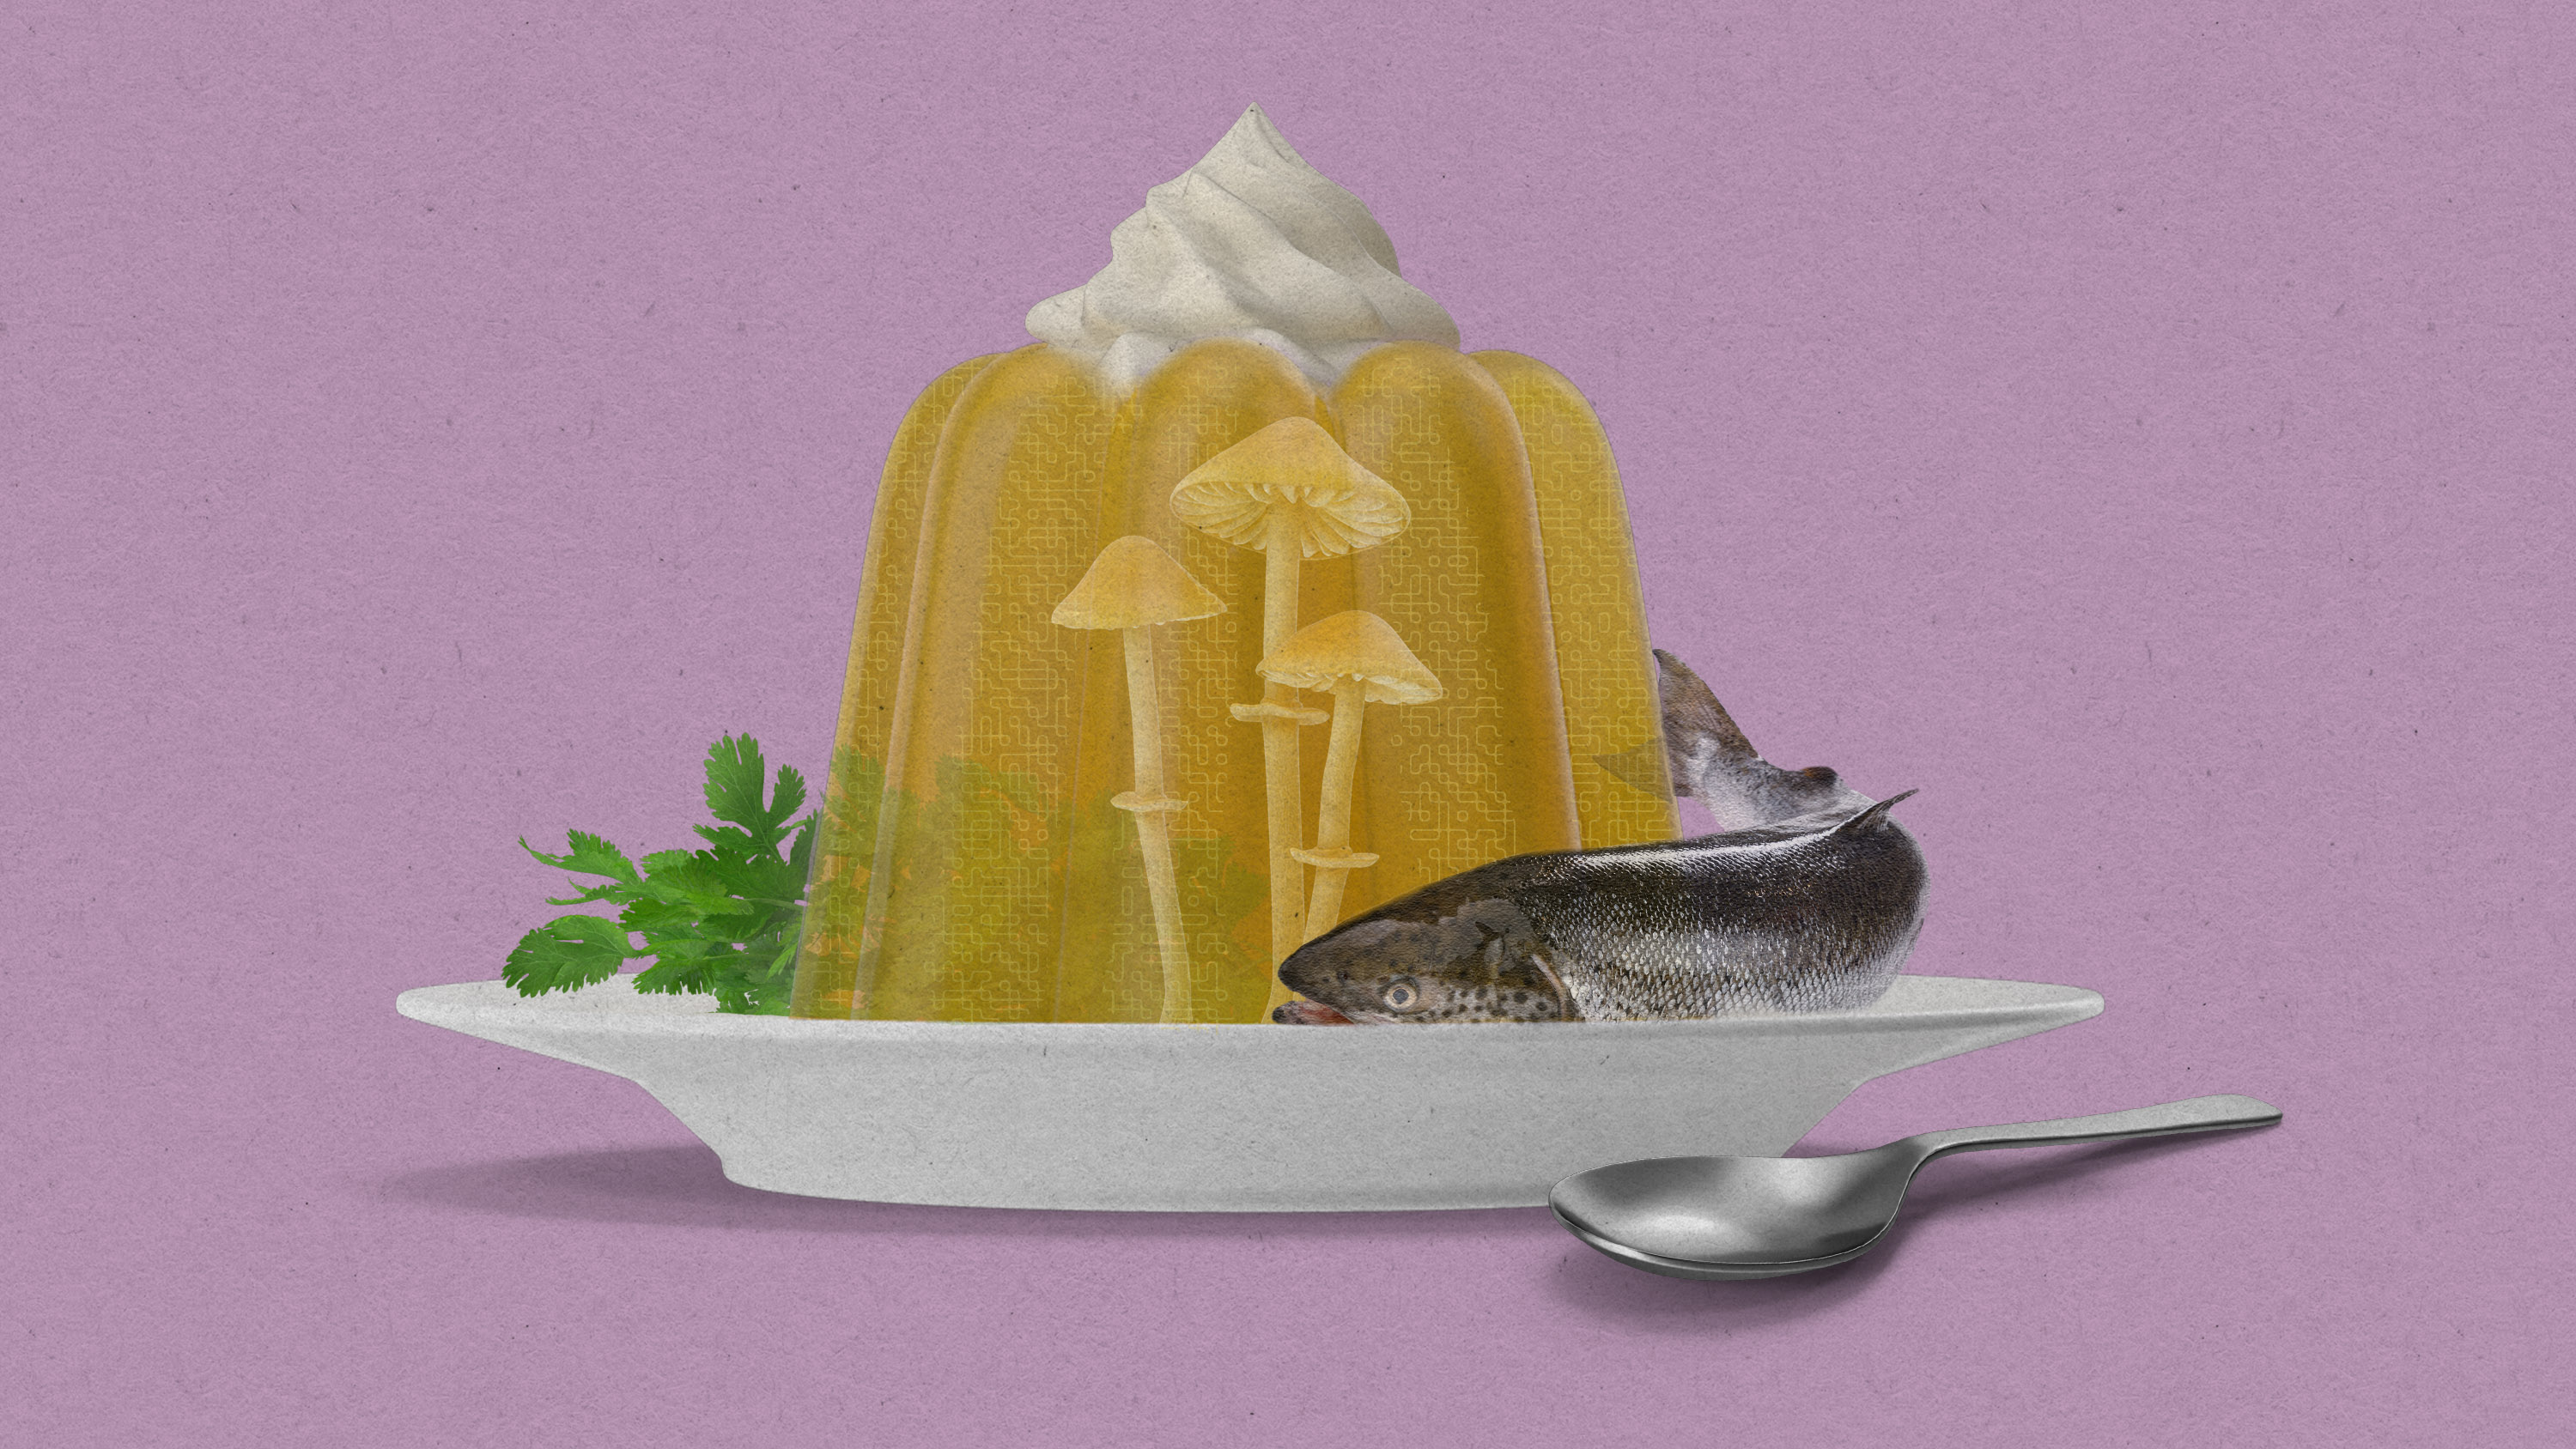 An aspic of poisonous philiotina rugosa mushrooms garnished with cilantro, whipped cream, and a whole fish